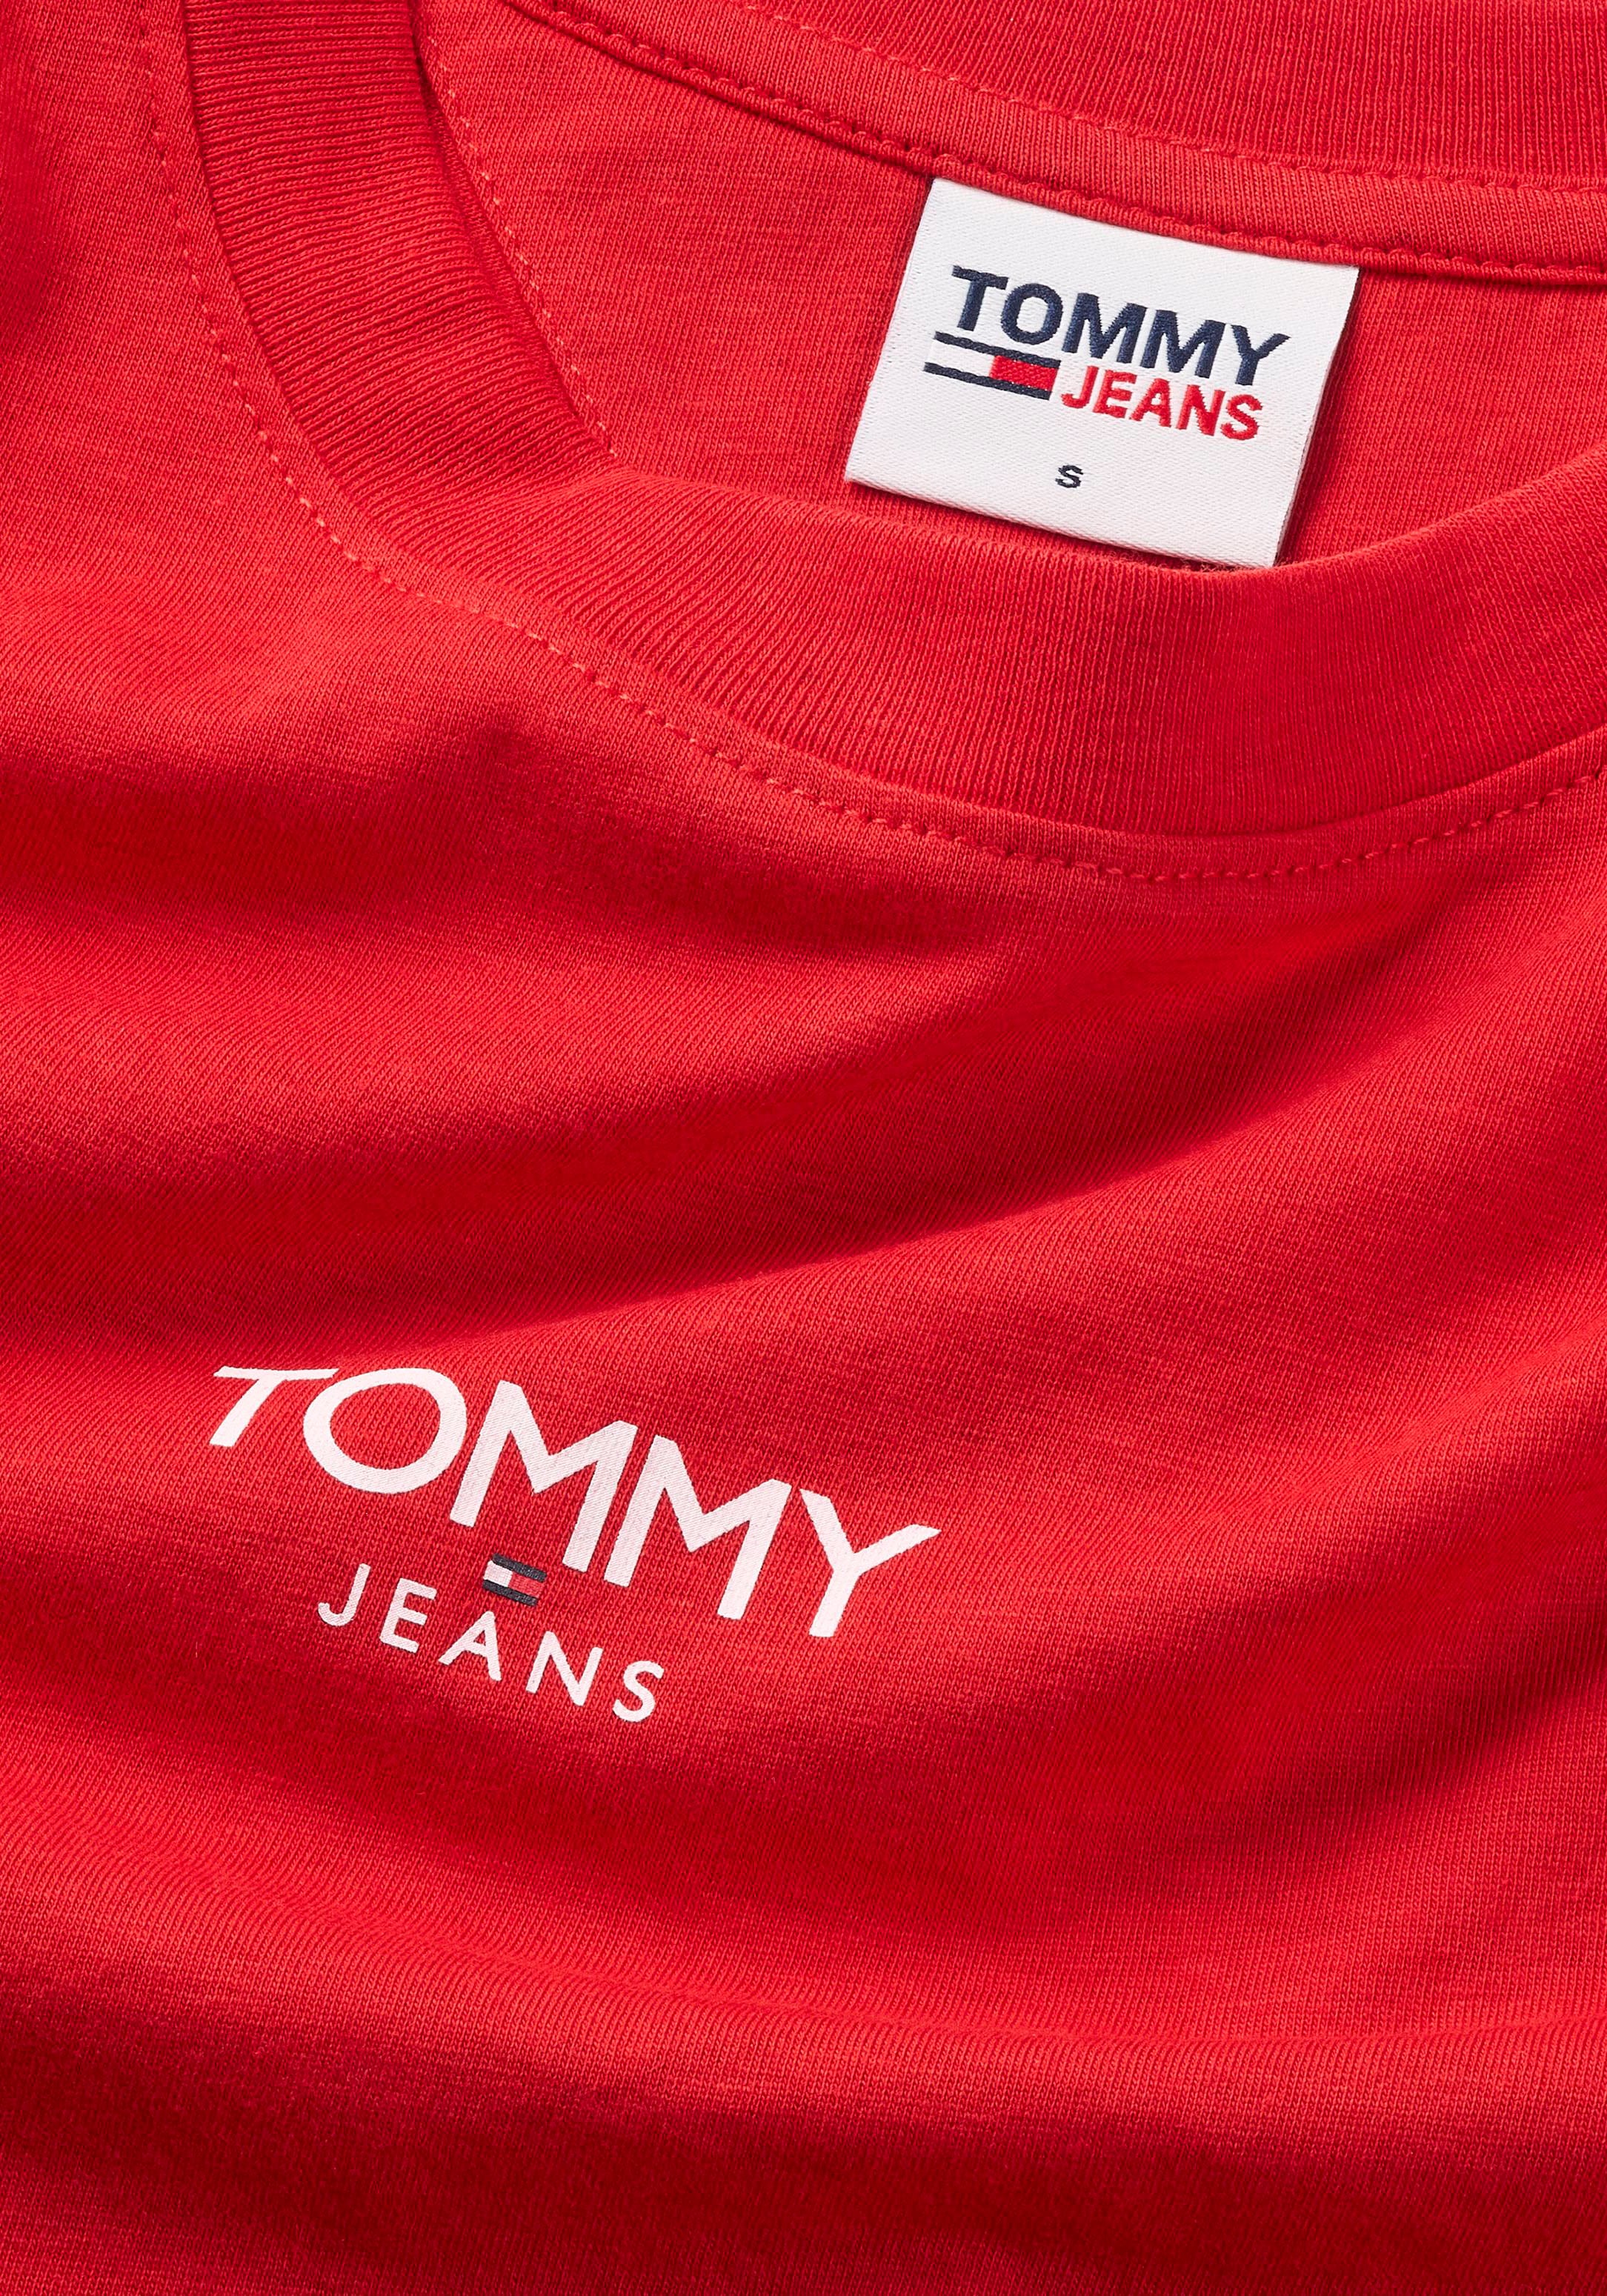 SS«, | BBY online »TJW 1 ESSENTIAL I\'m T-Shirt LOGO Tommy mit walking Logo Tommy Jeans Jeans